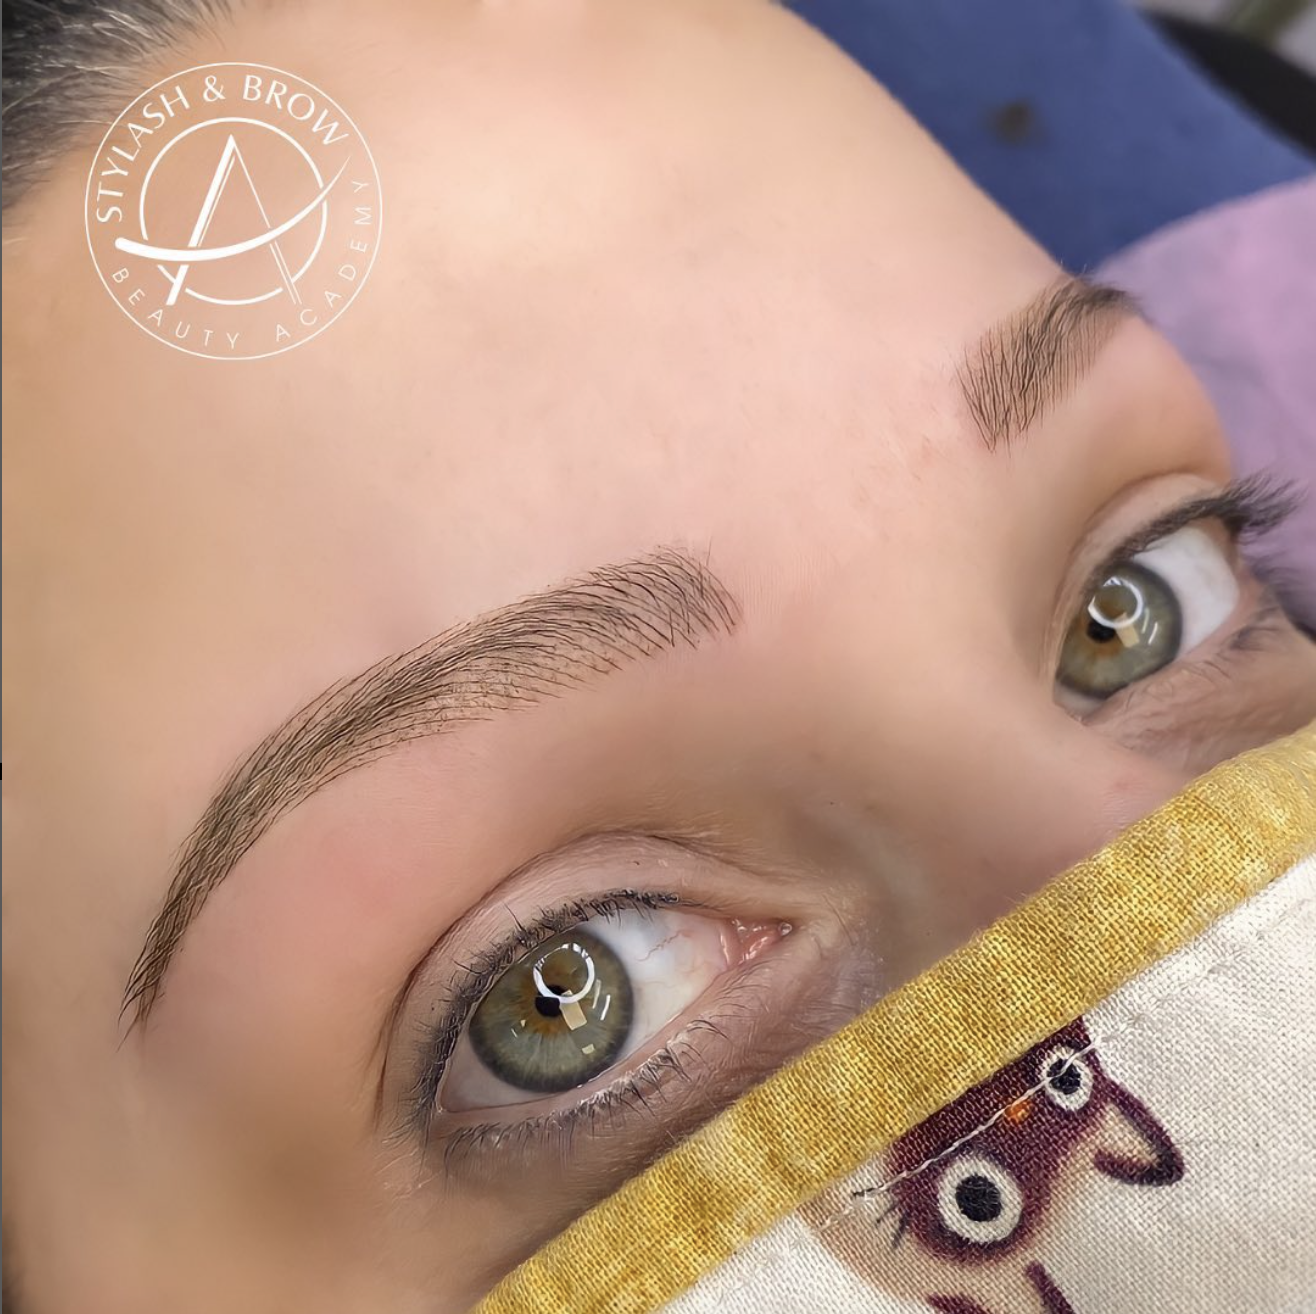 Microblading results